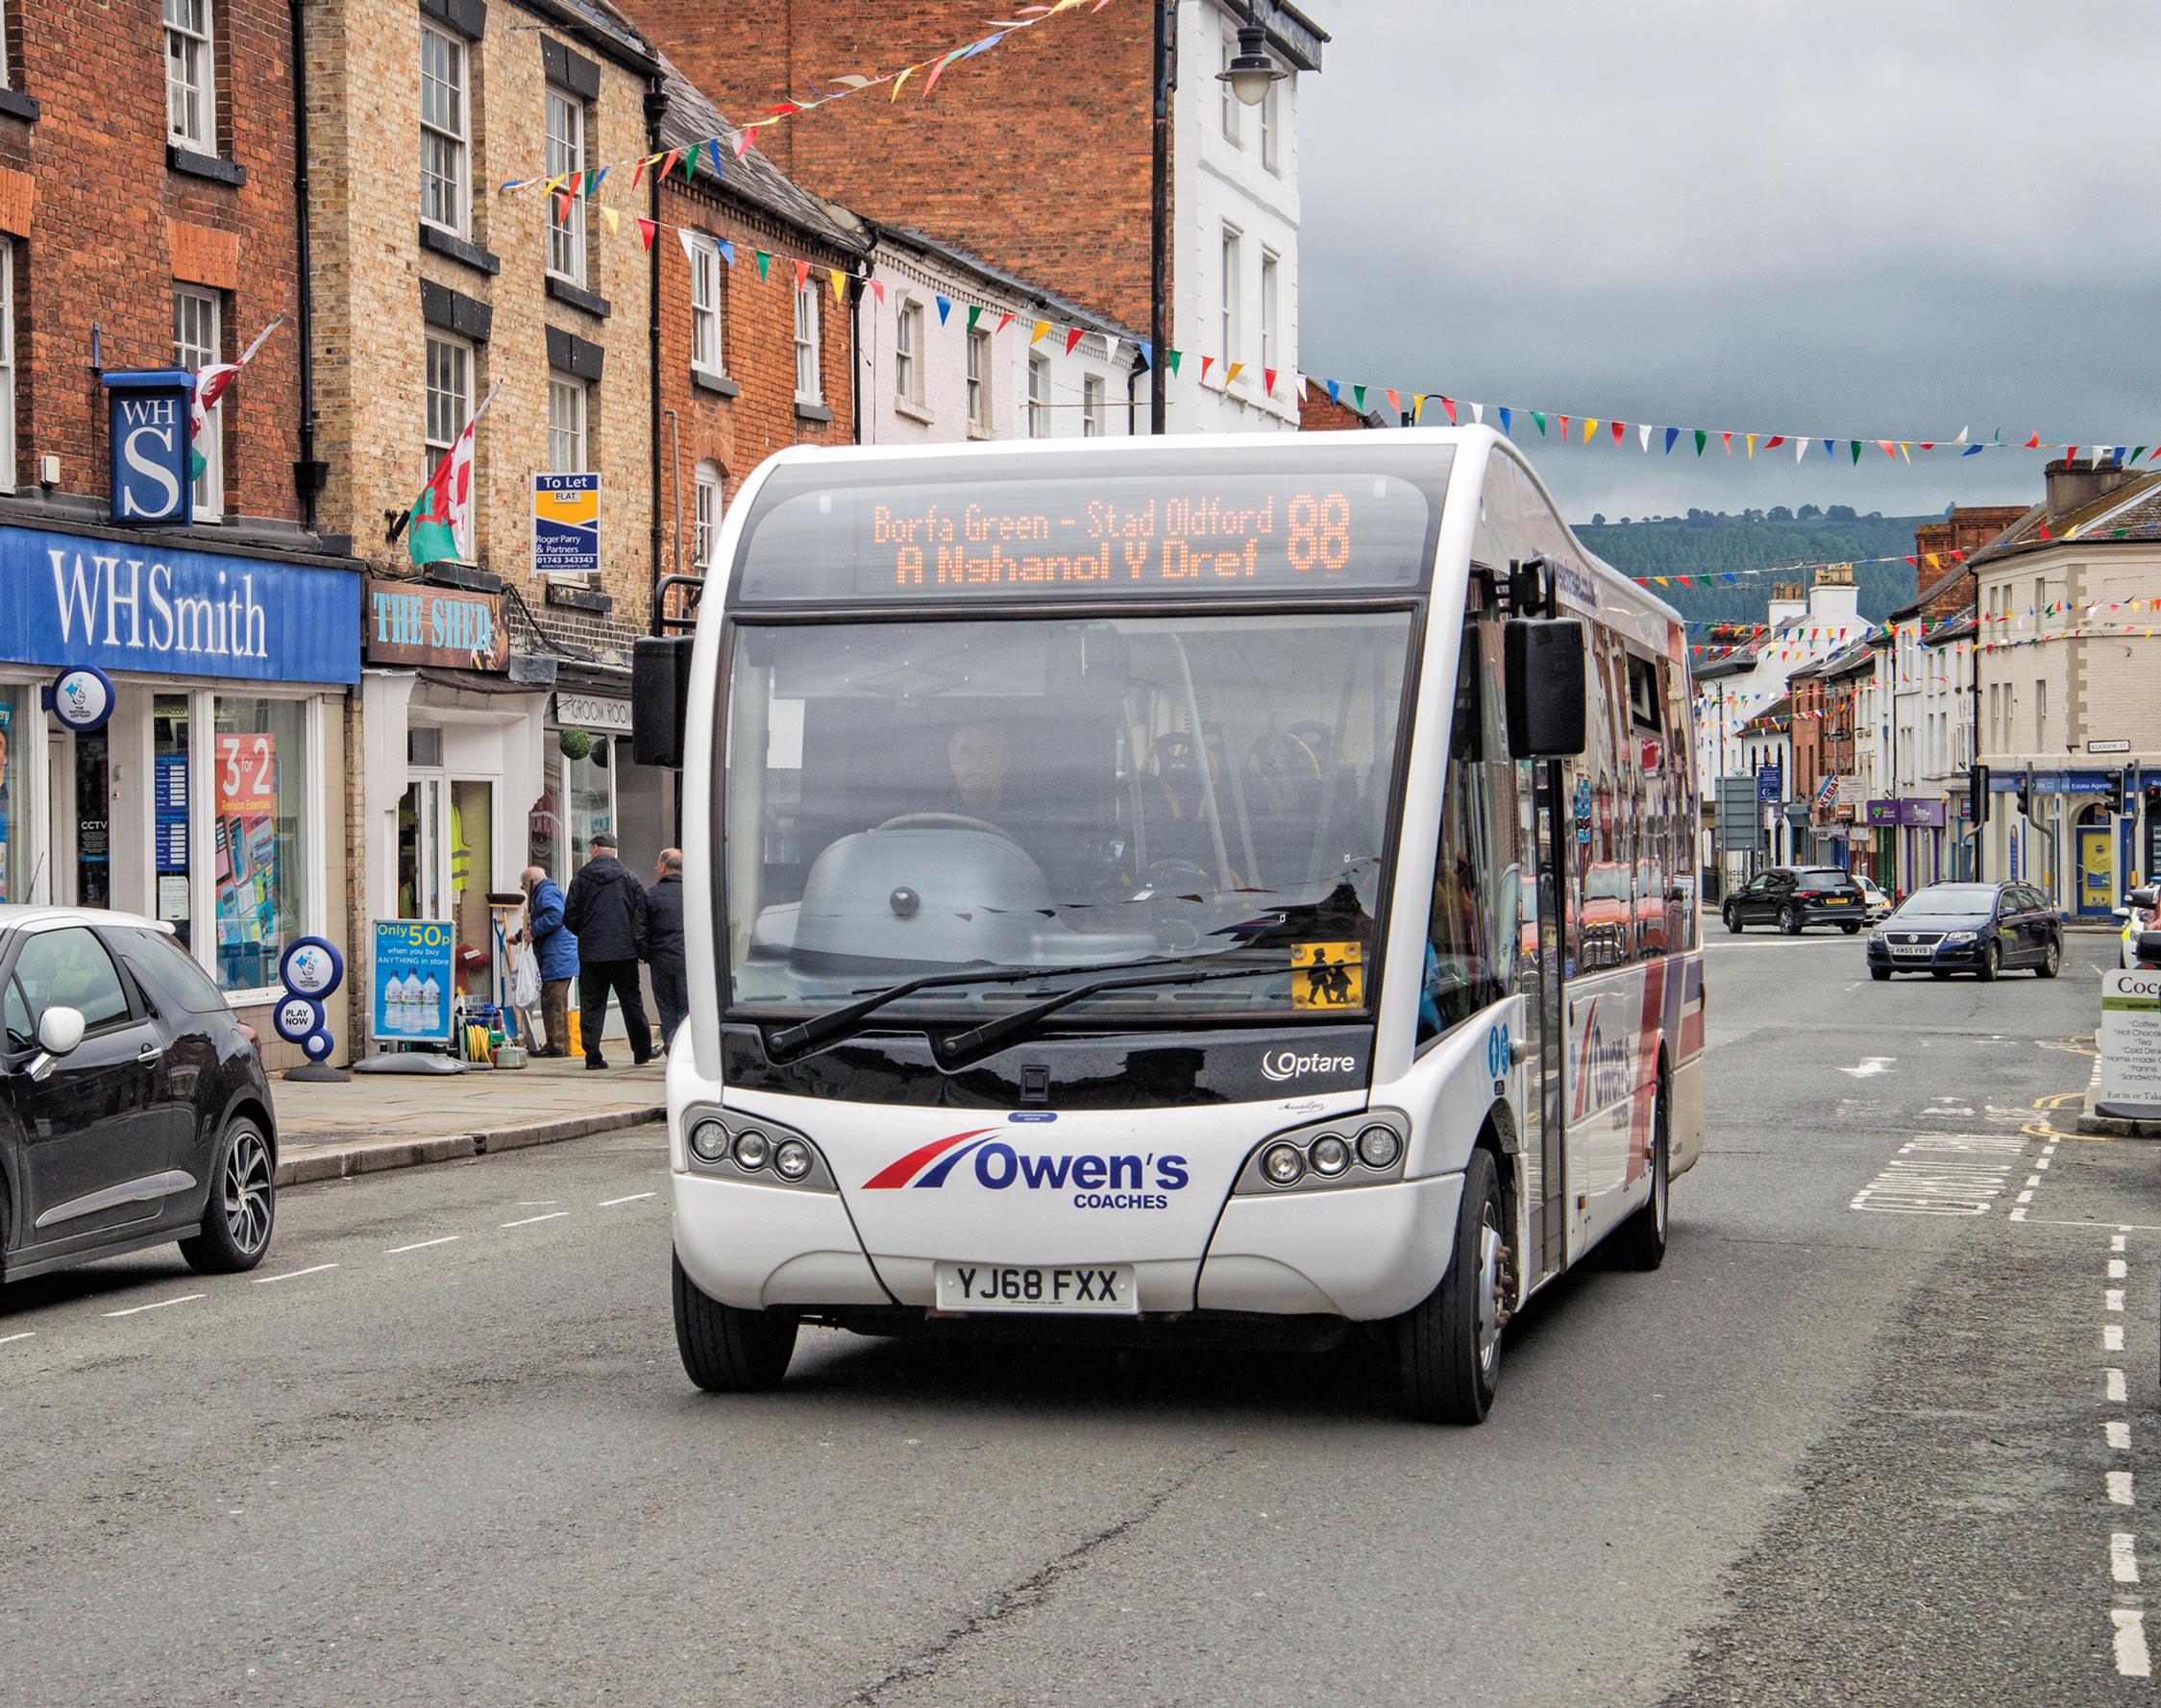 Small operators provide a larger proportion of bus services in Wales than in England